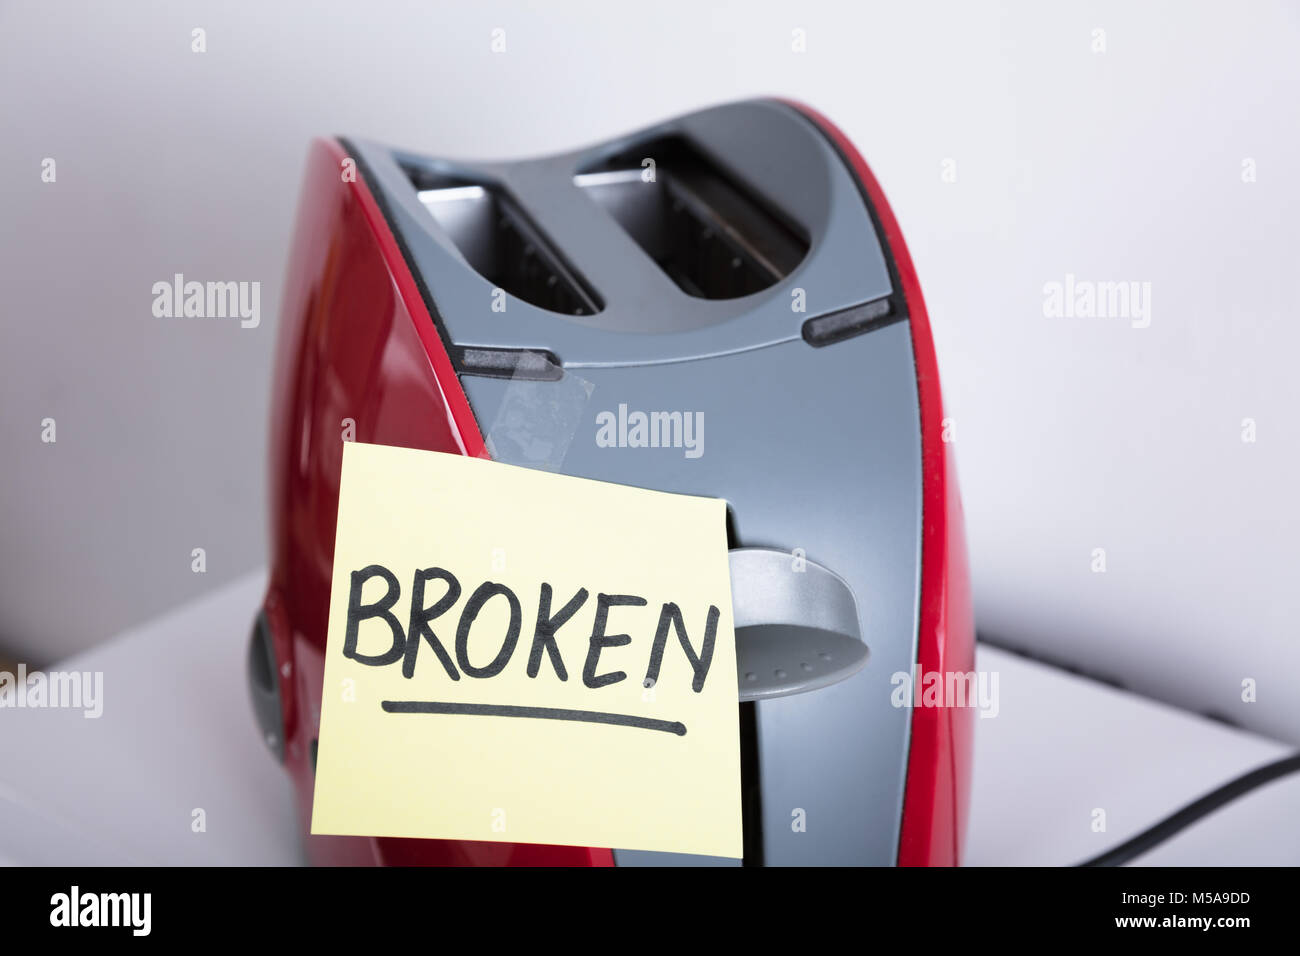 Close-up Of A Red Toaster With Adhesive Notes Showing Broken Text Stock Photo